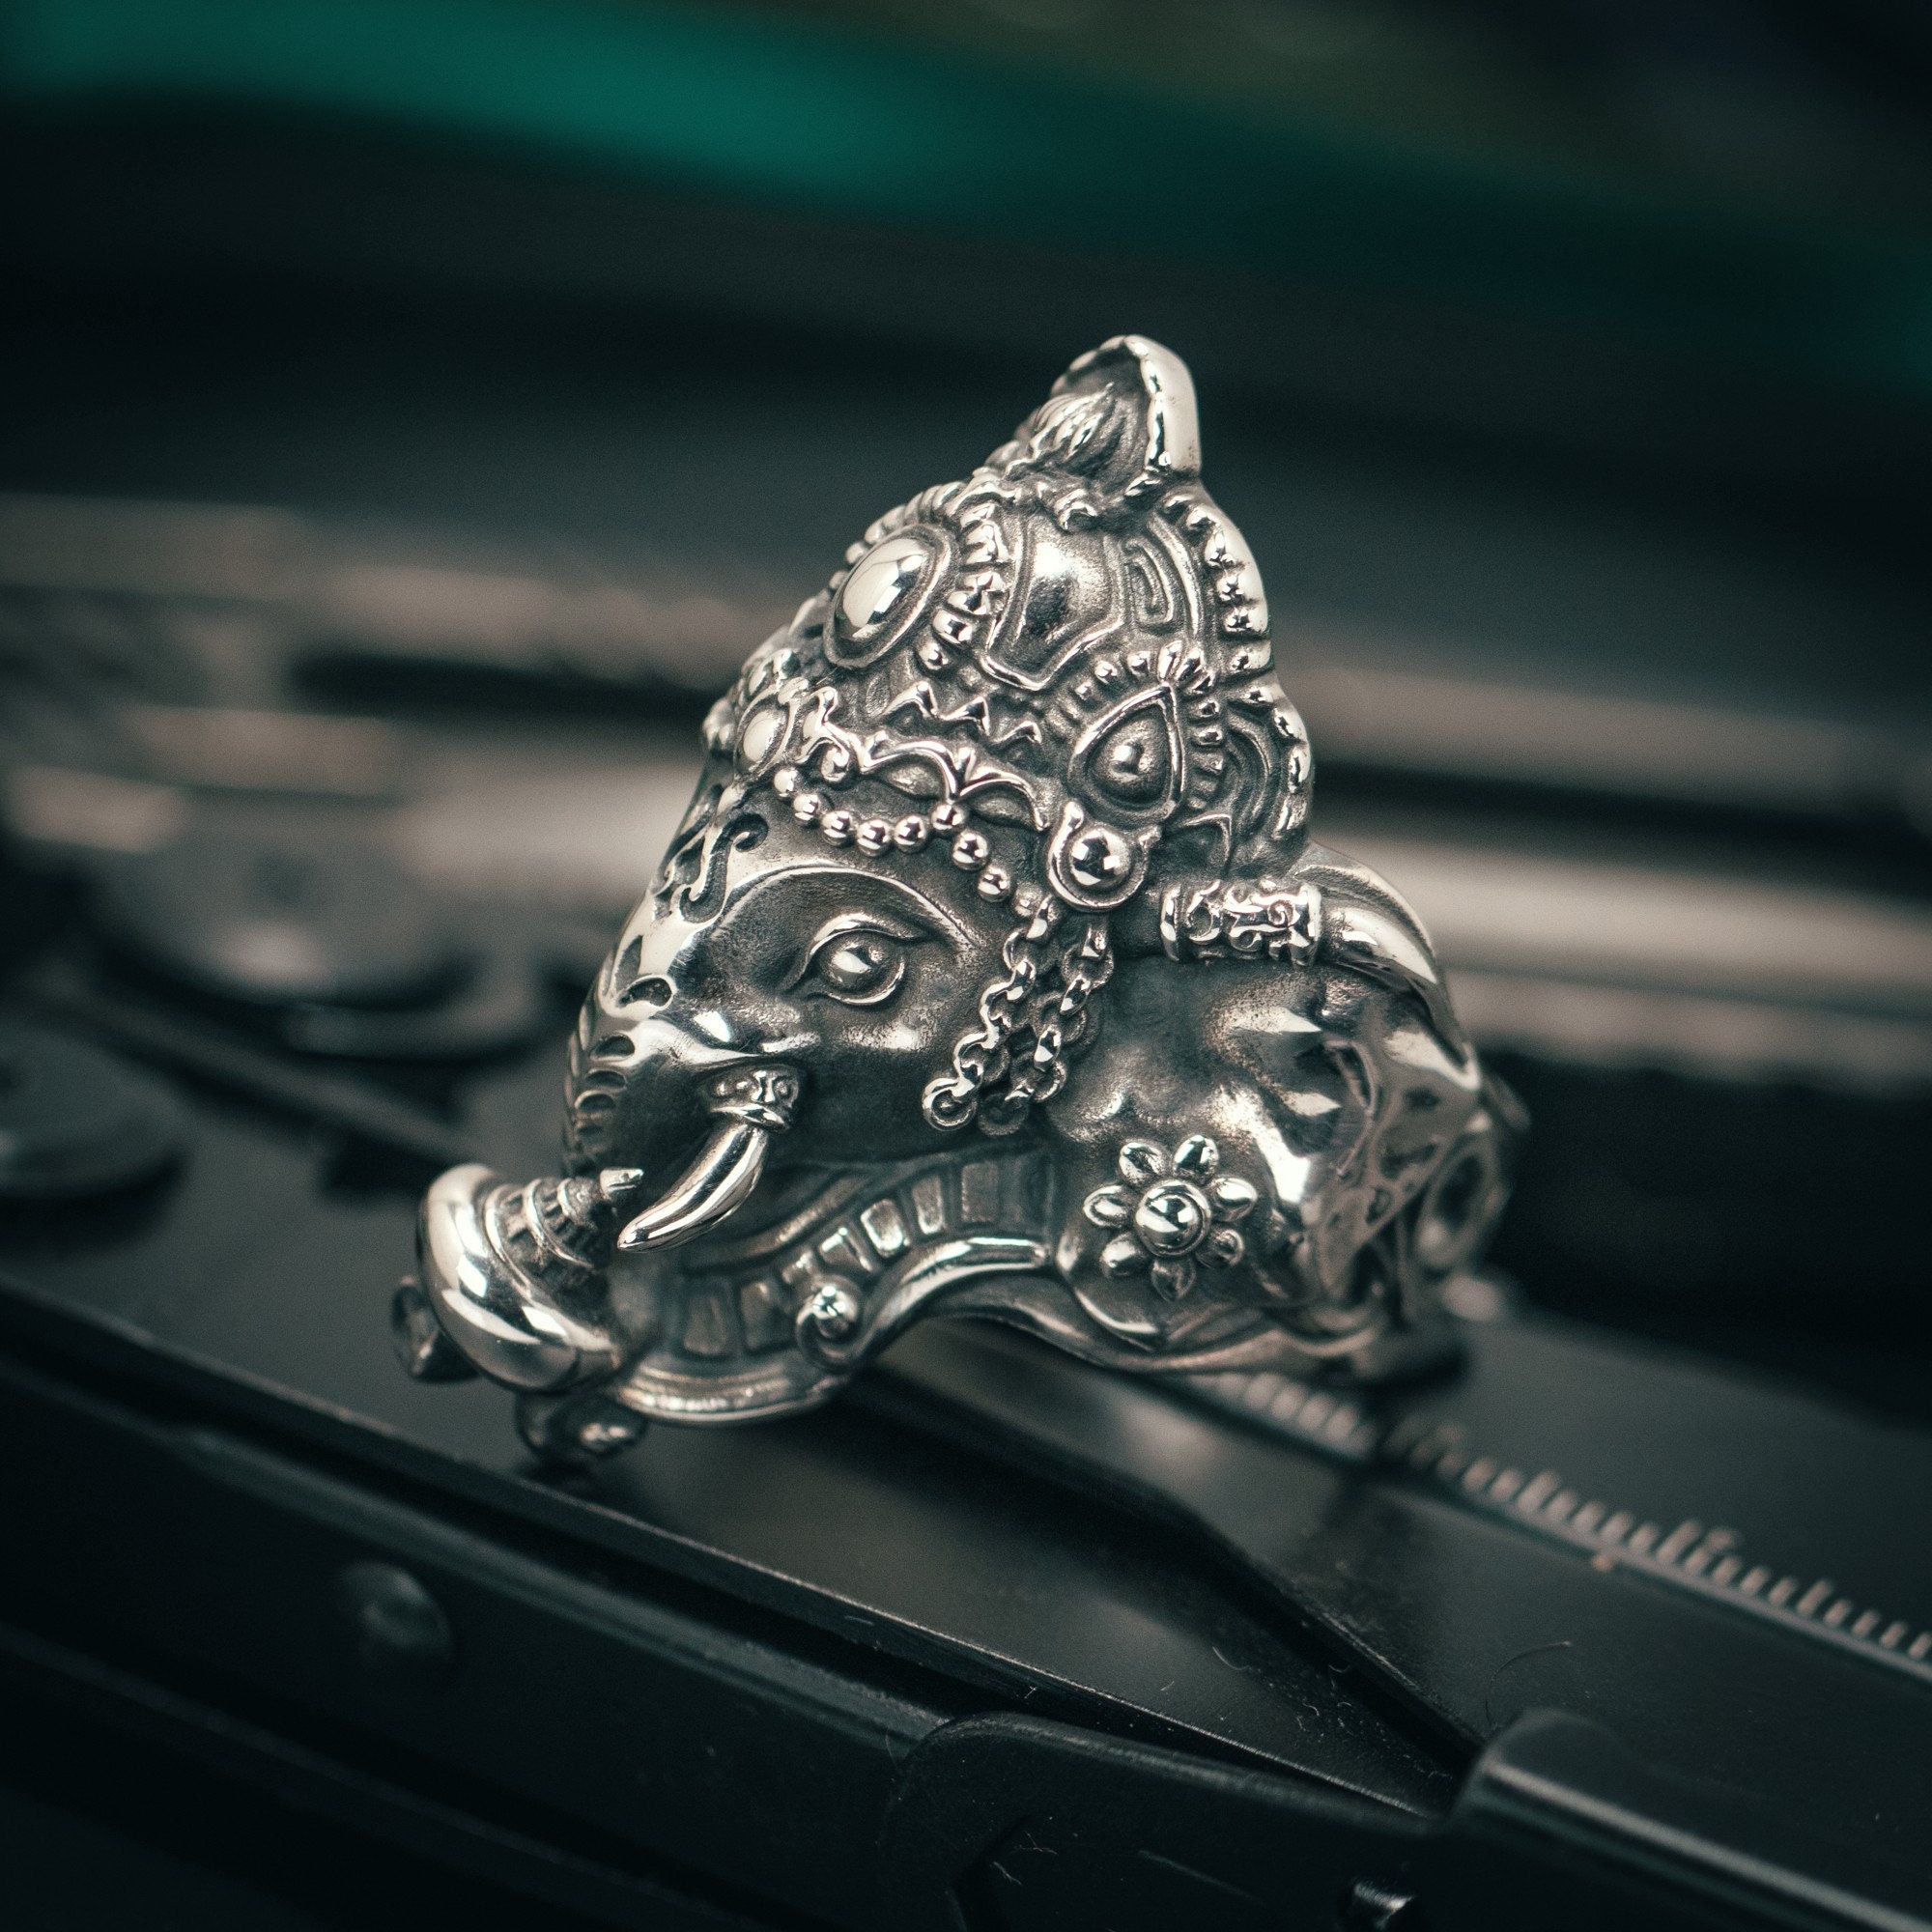 Unisex 92.5 925 Sterling Silver Lord Ganesha Ring at Rs 100/gram in Jaipur